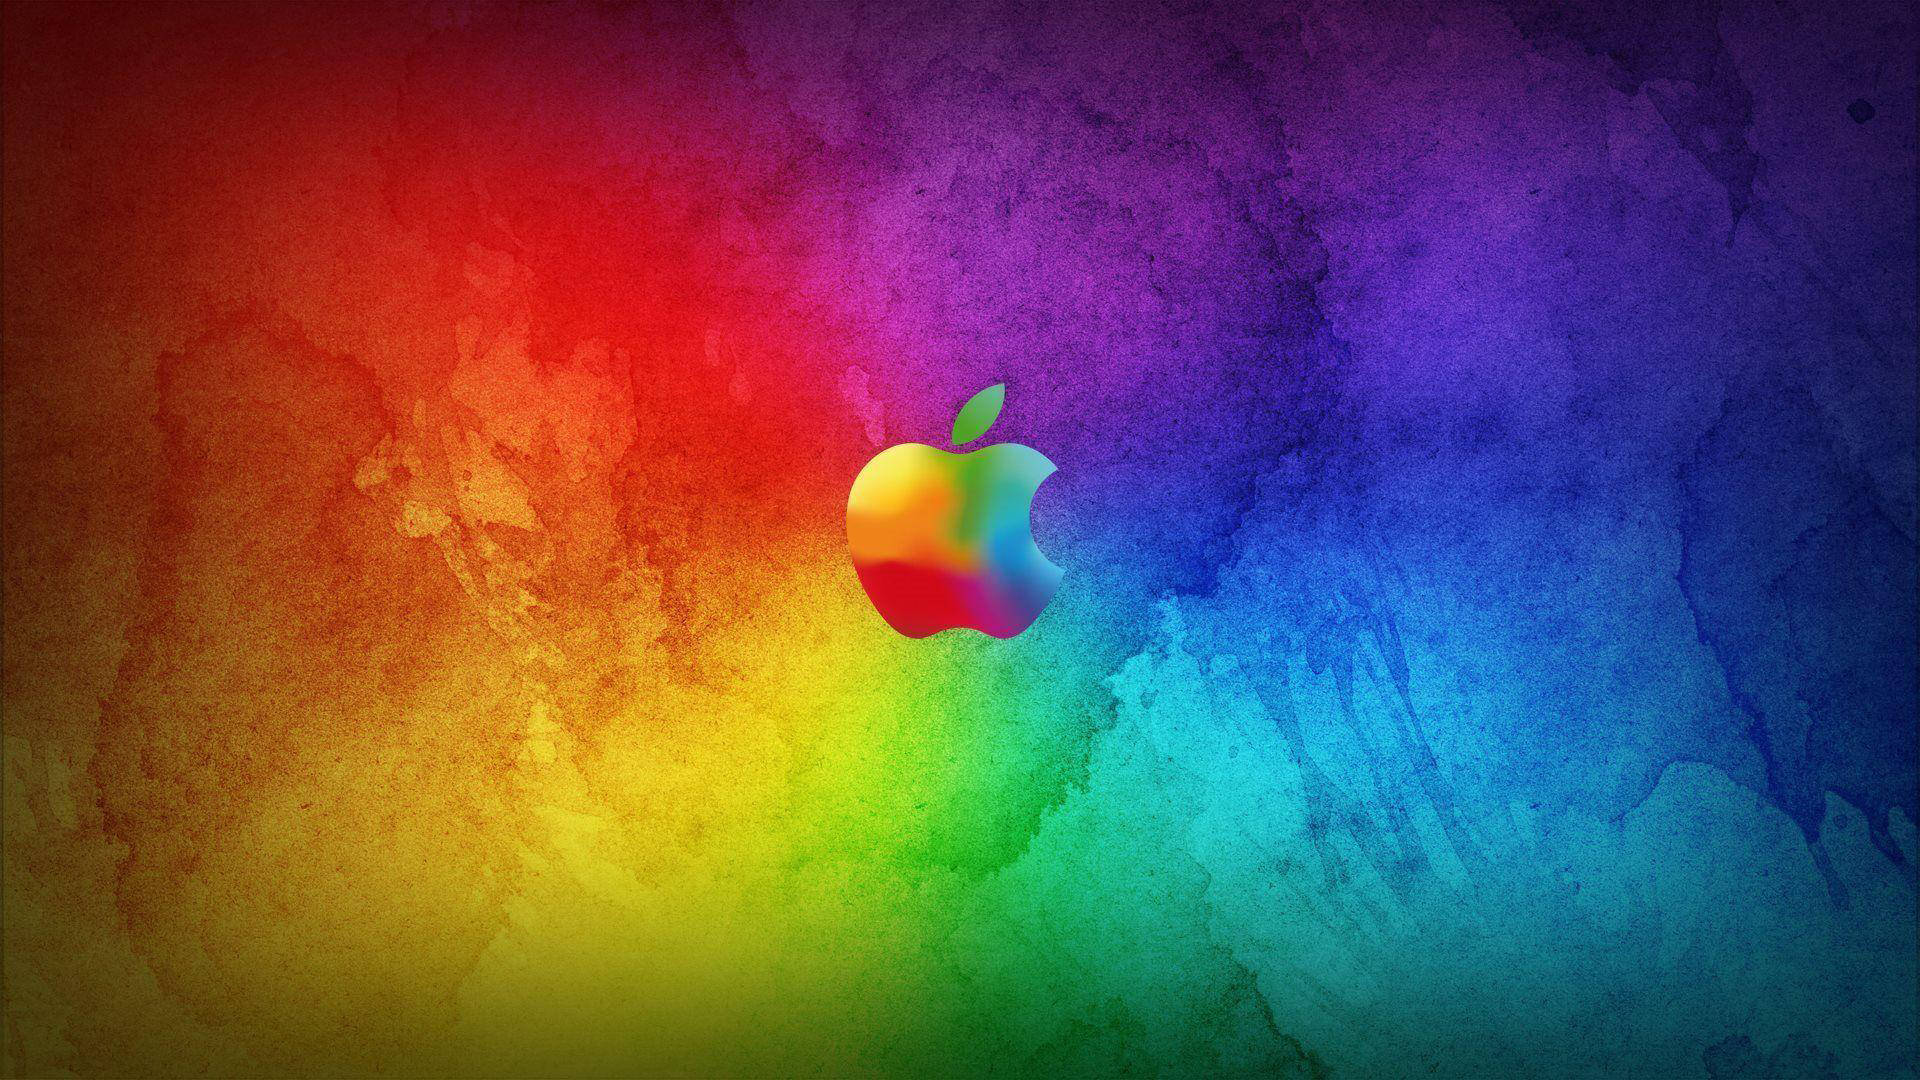 Apple In Colorful Painting Wallpaper Technology 2K MacBook